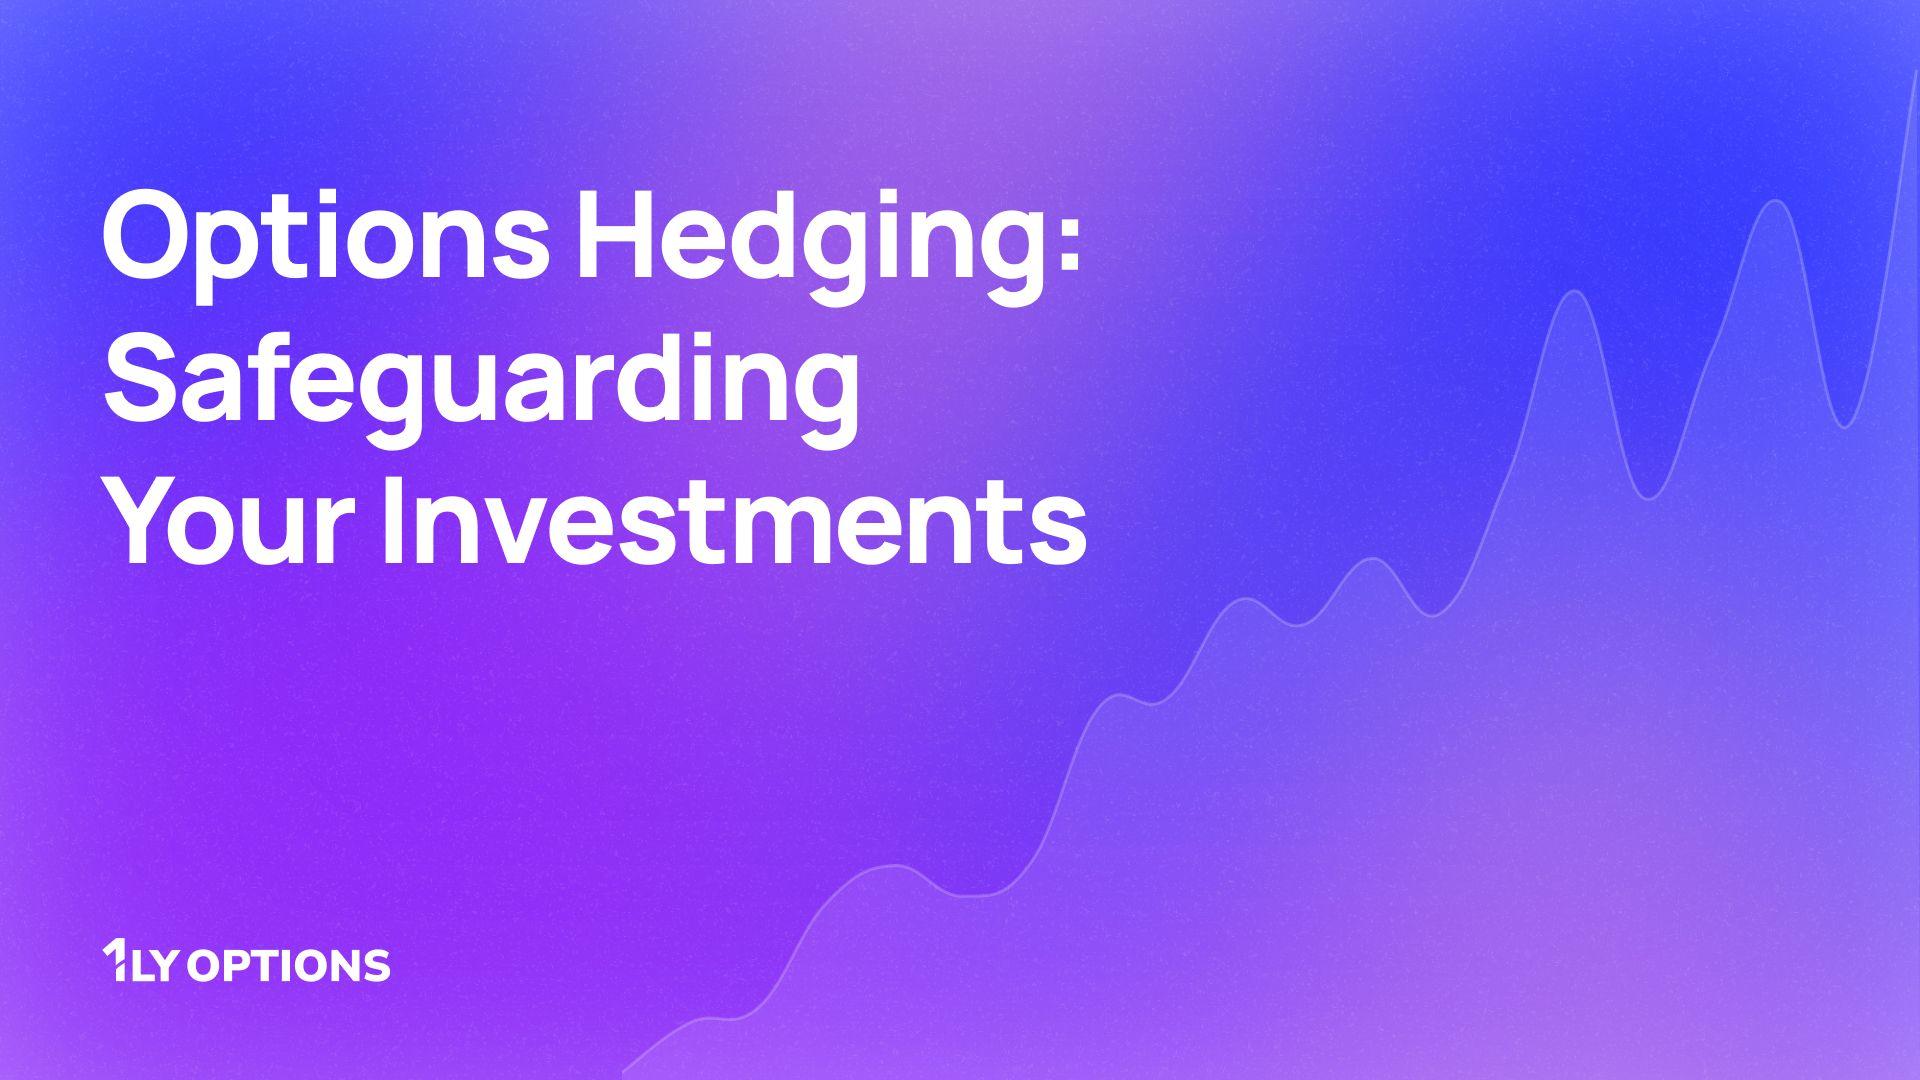 Options Hedging: Safeguarding Your Investments